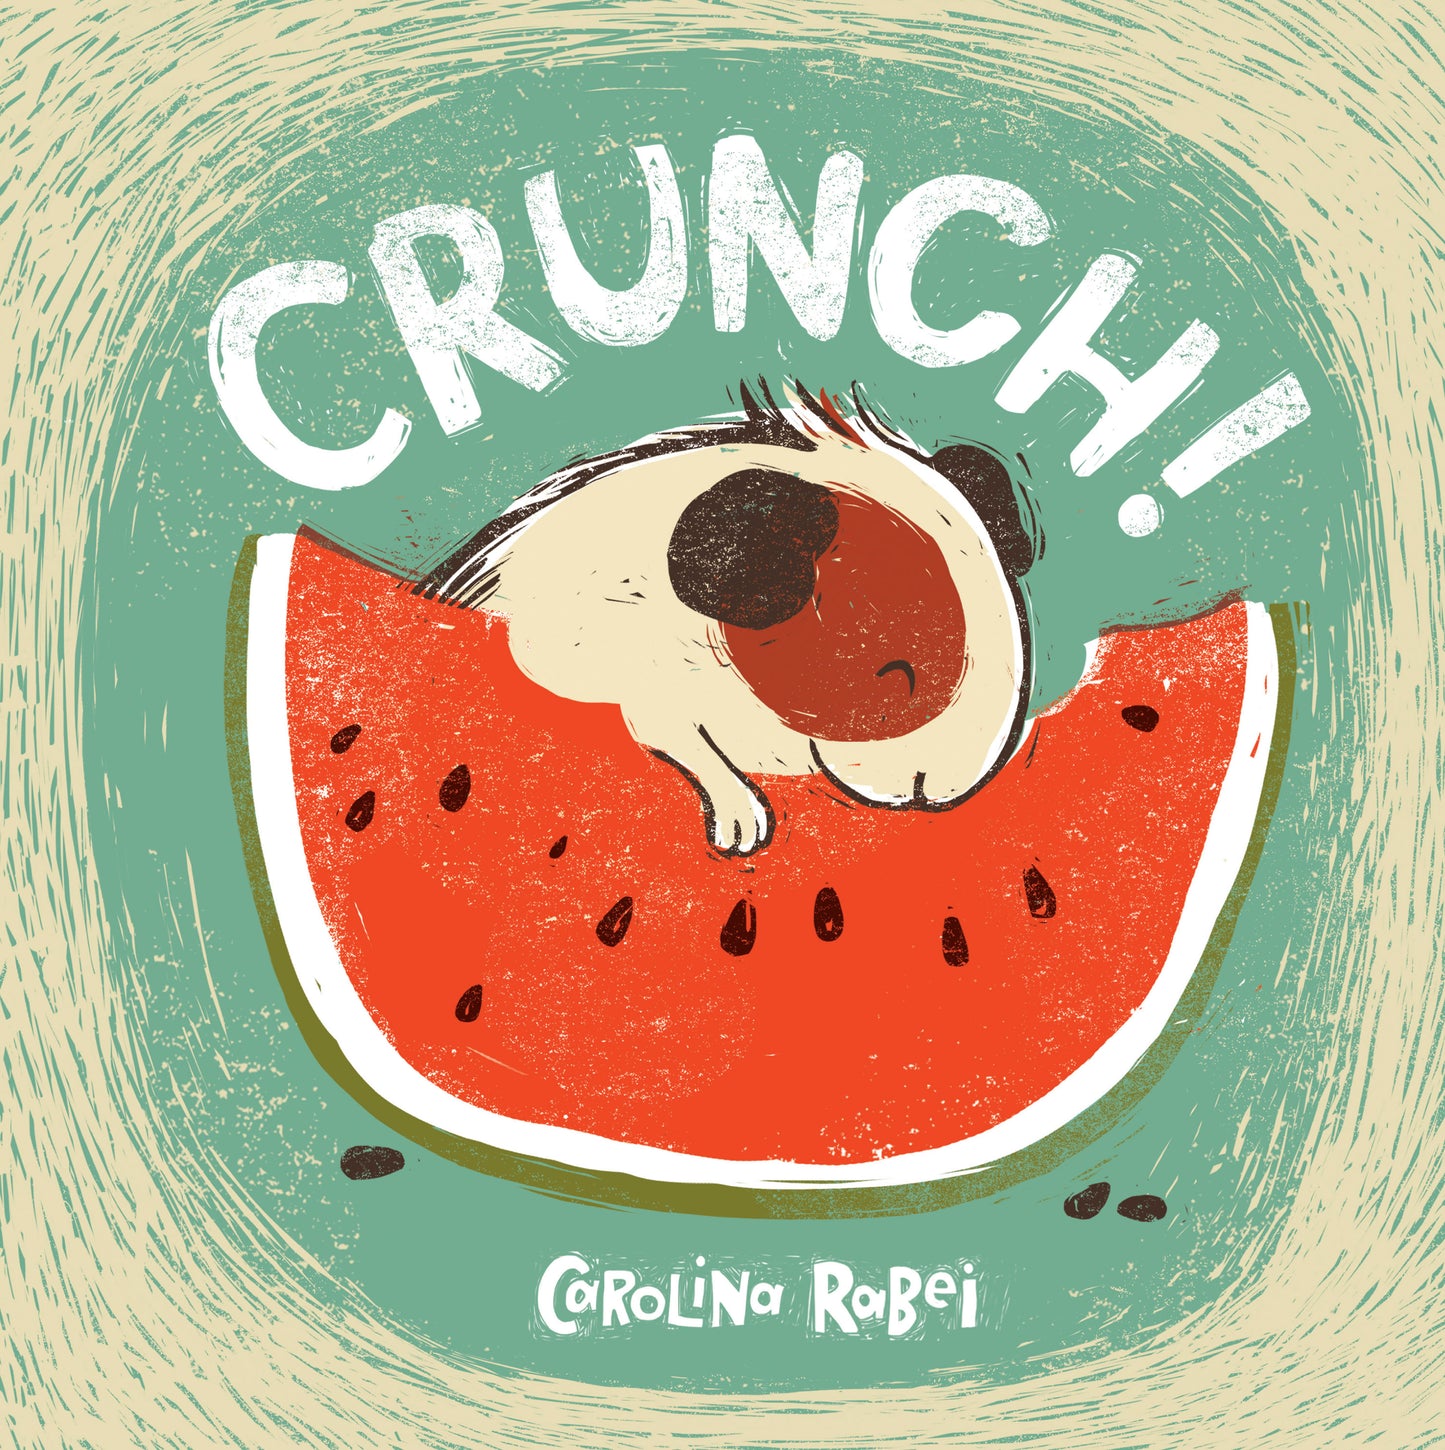 Crunch! (Hardcover Edition)